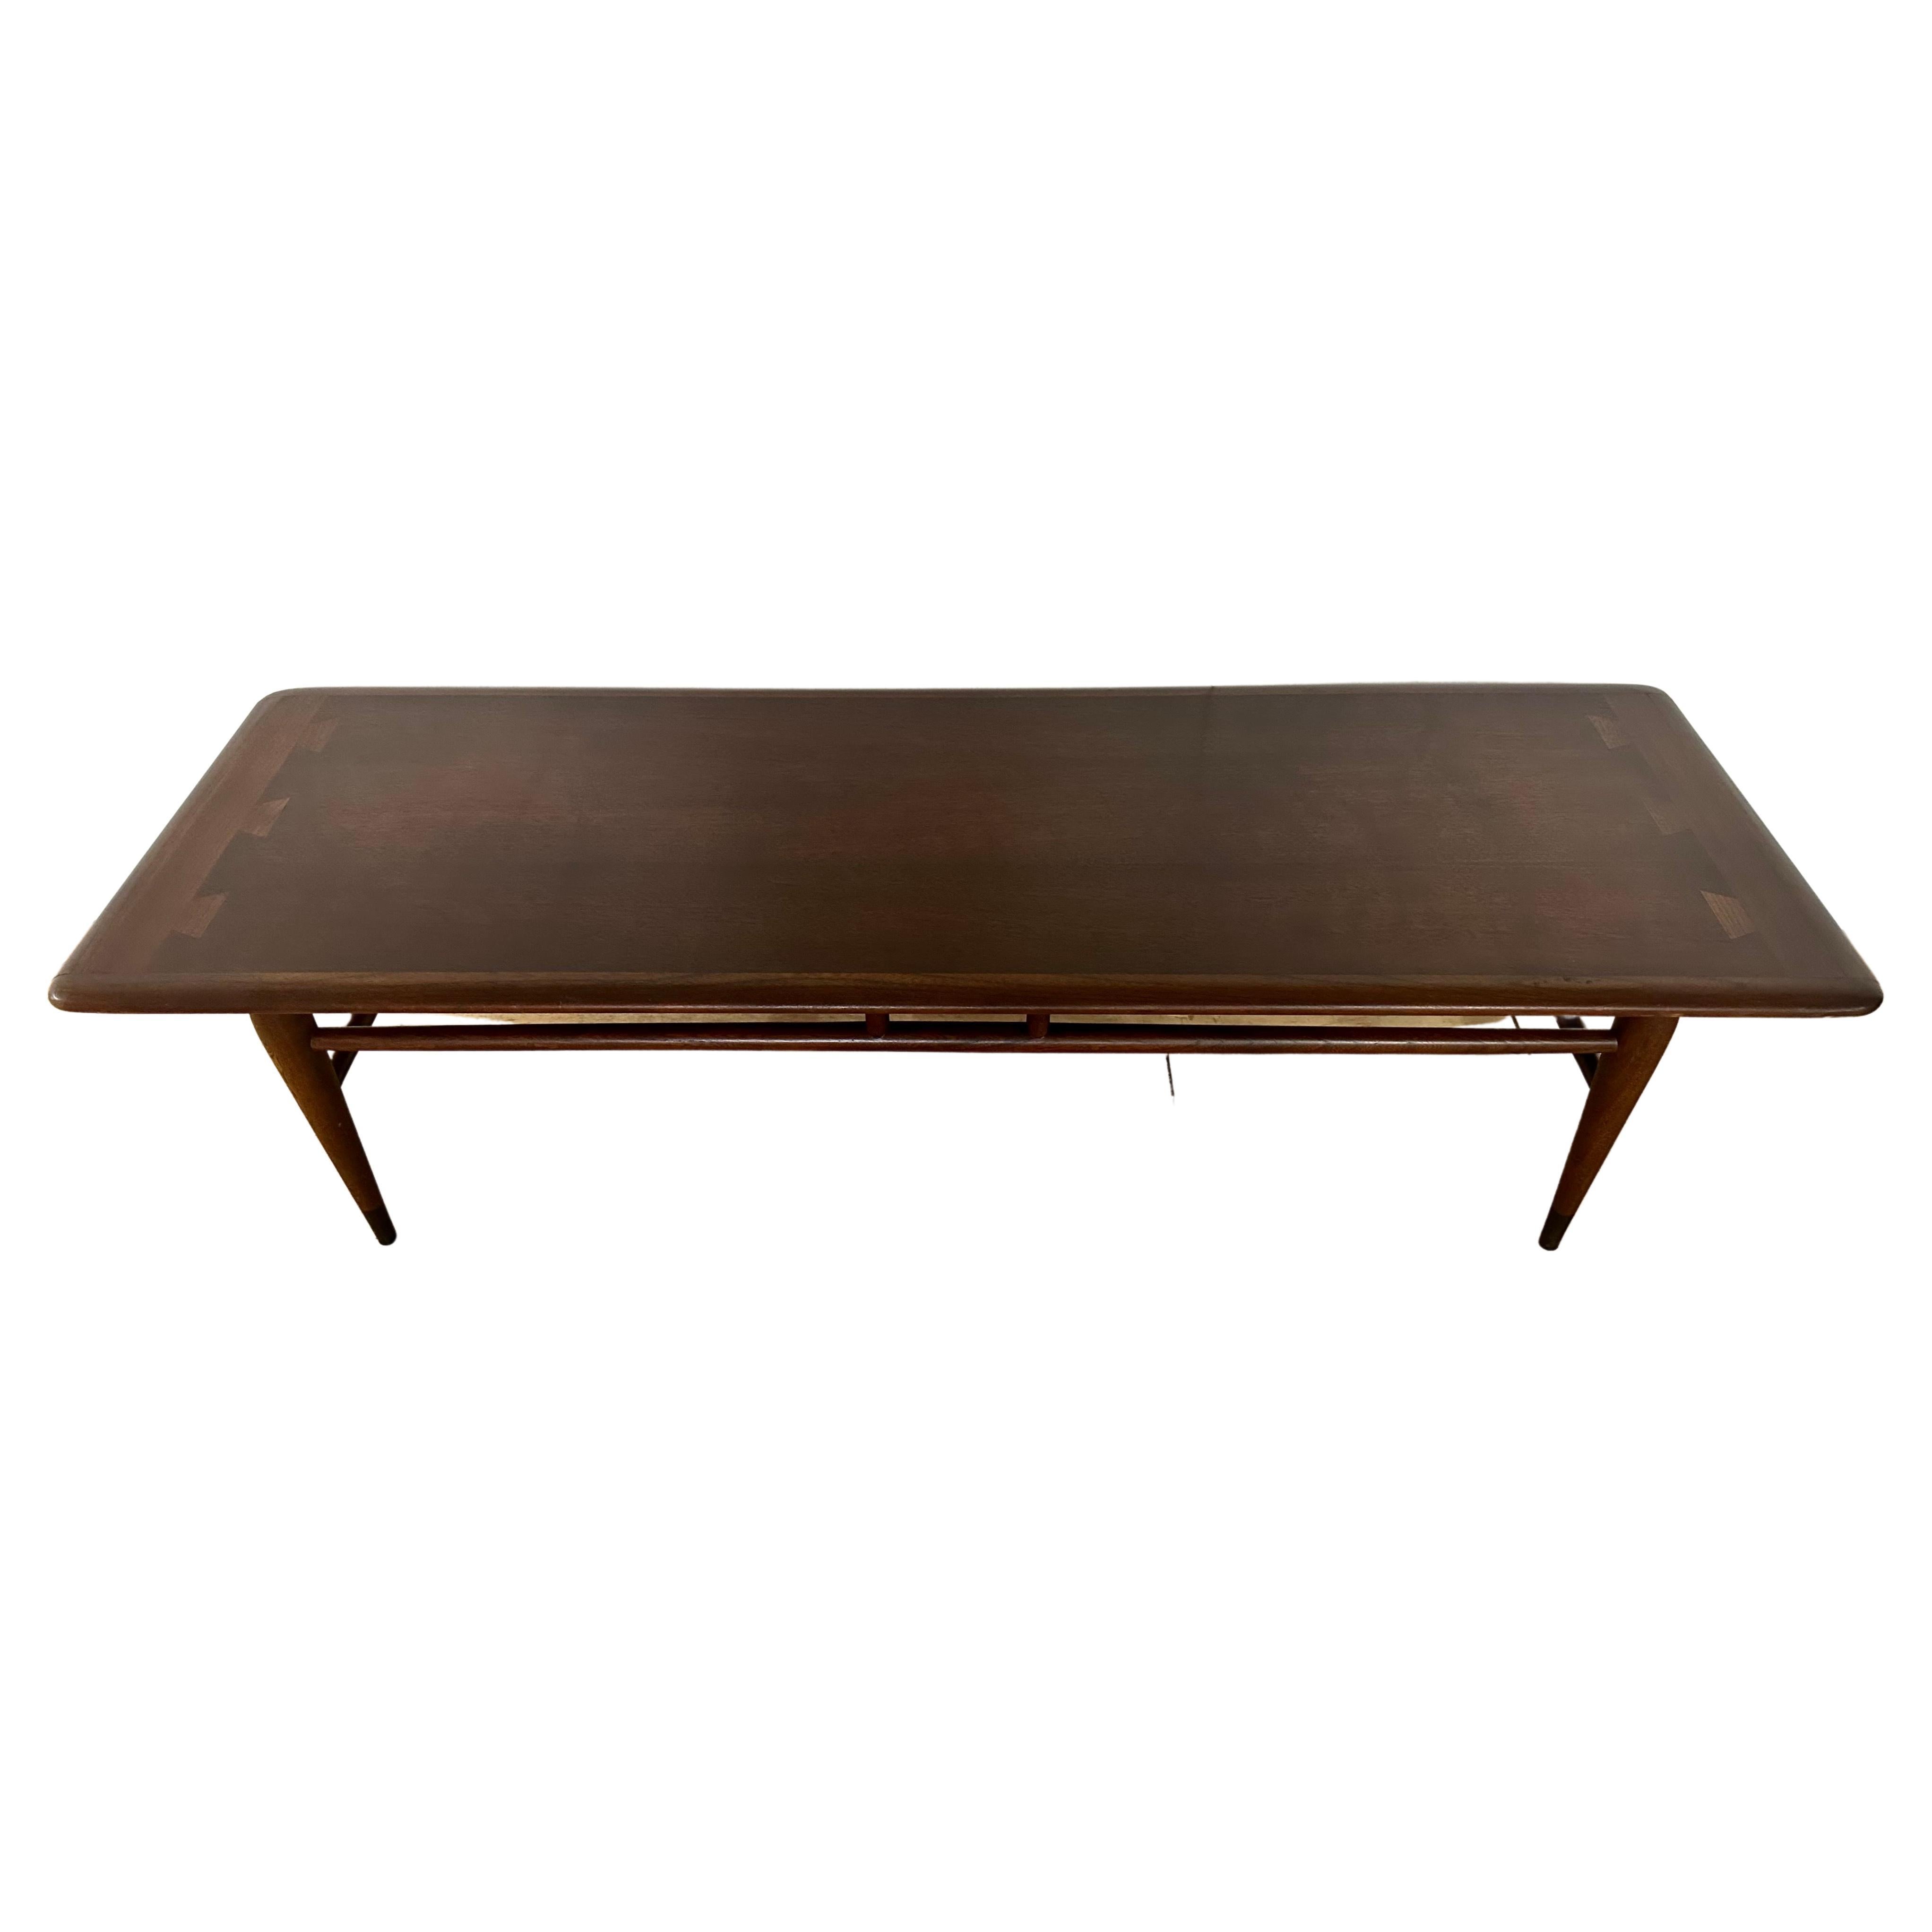 This walnut coffee table balances stylish warmth of Scandinavian Modern chic and the clean curves that gives the tabletop a streamlined appearance with tapered legs that creates a graceful poise.